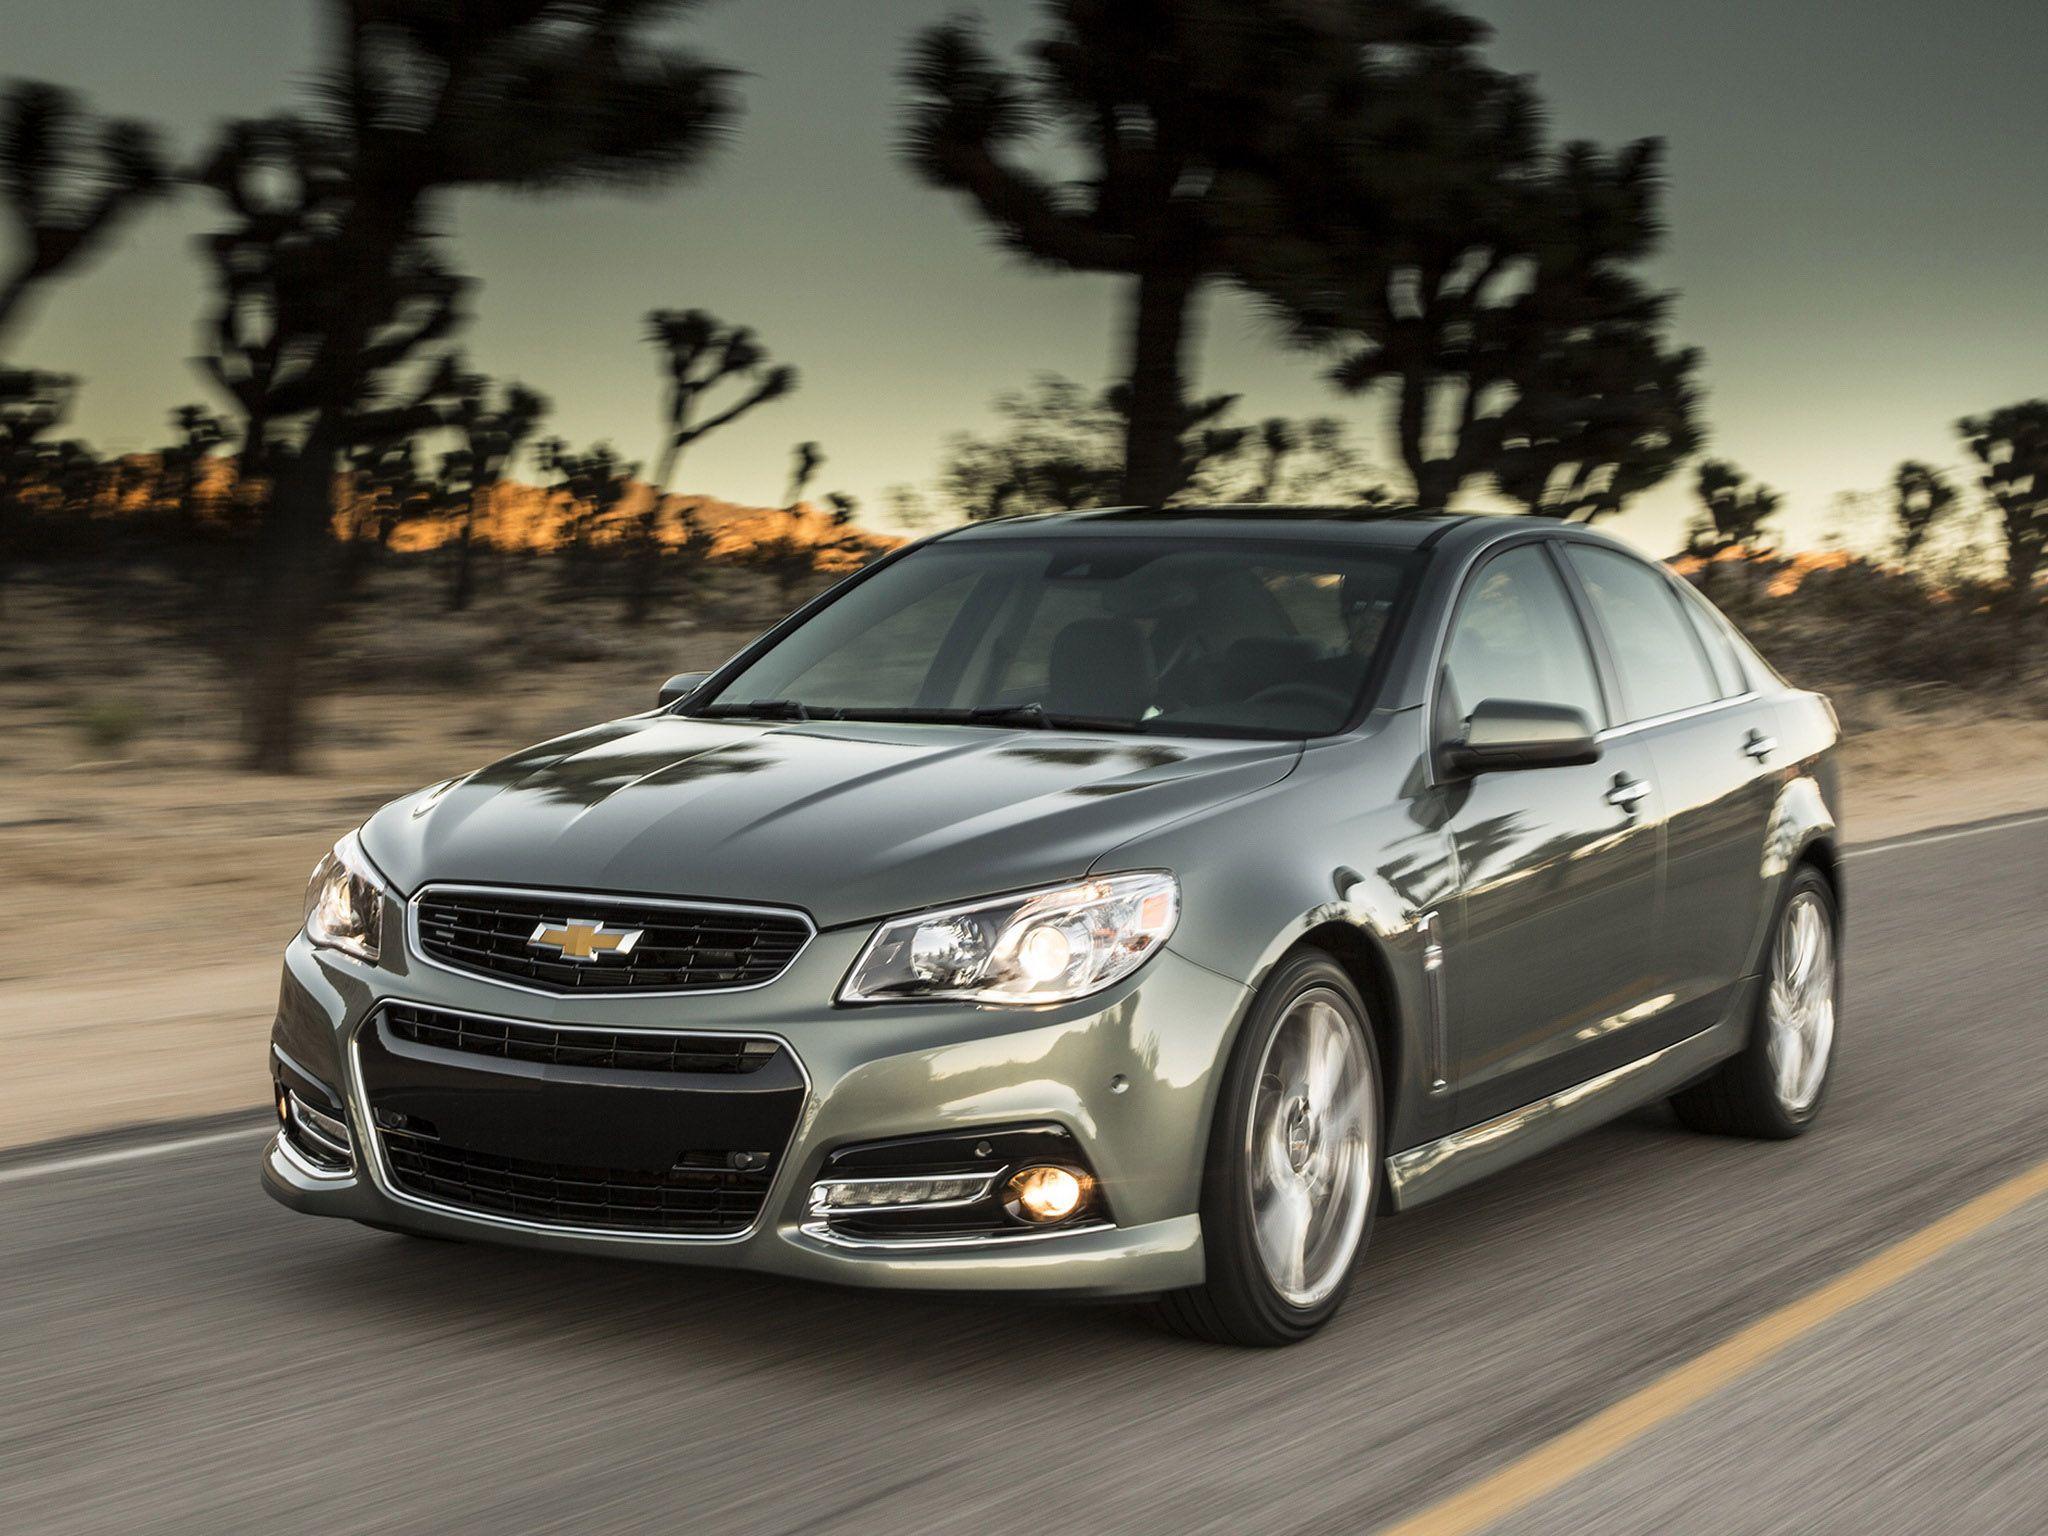 Chevrolet Ss Wallpapers Wallpaper Cave